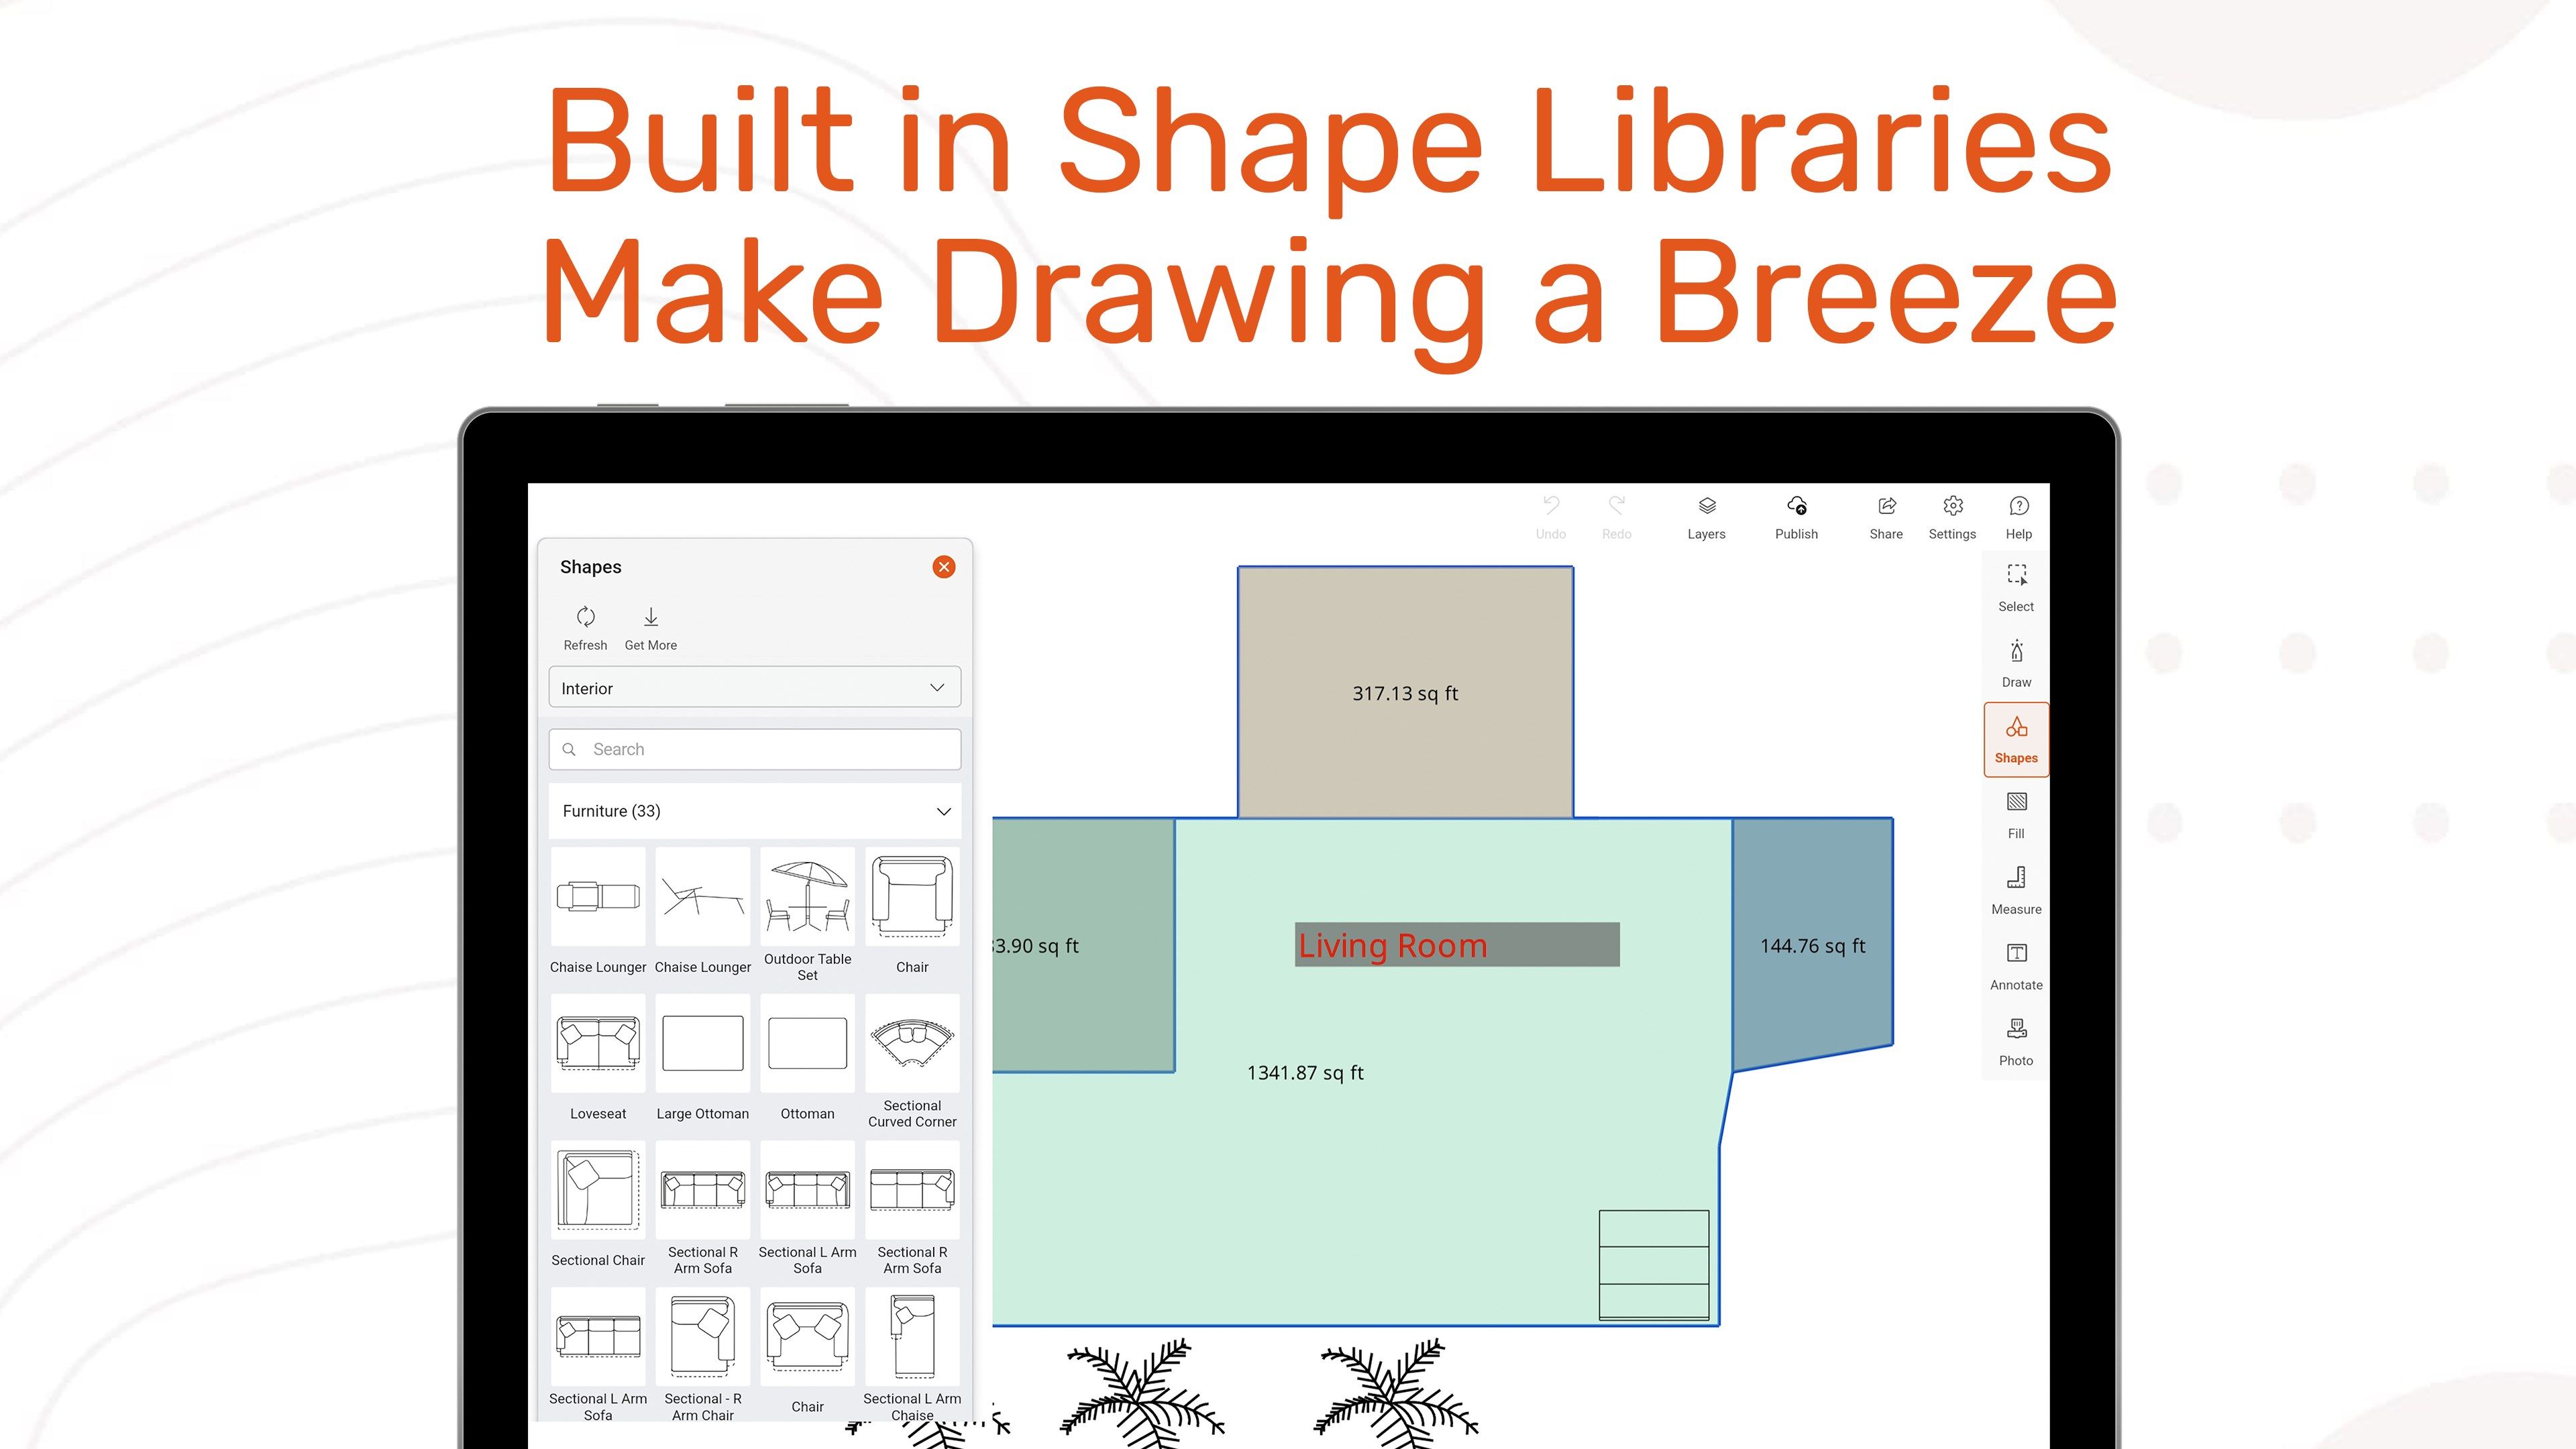 Add Built-in Shapes from our Library